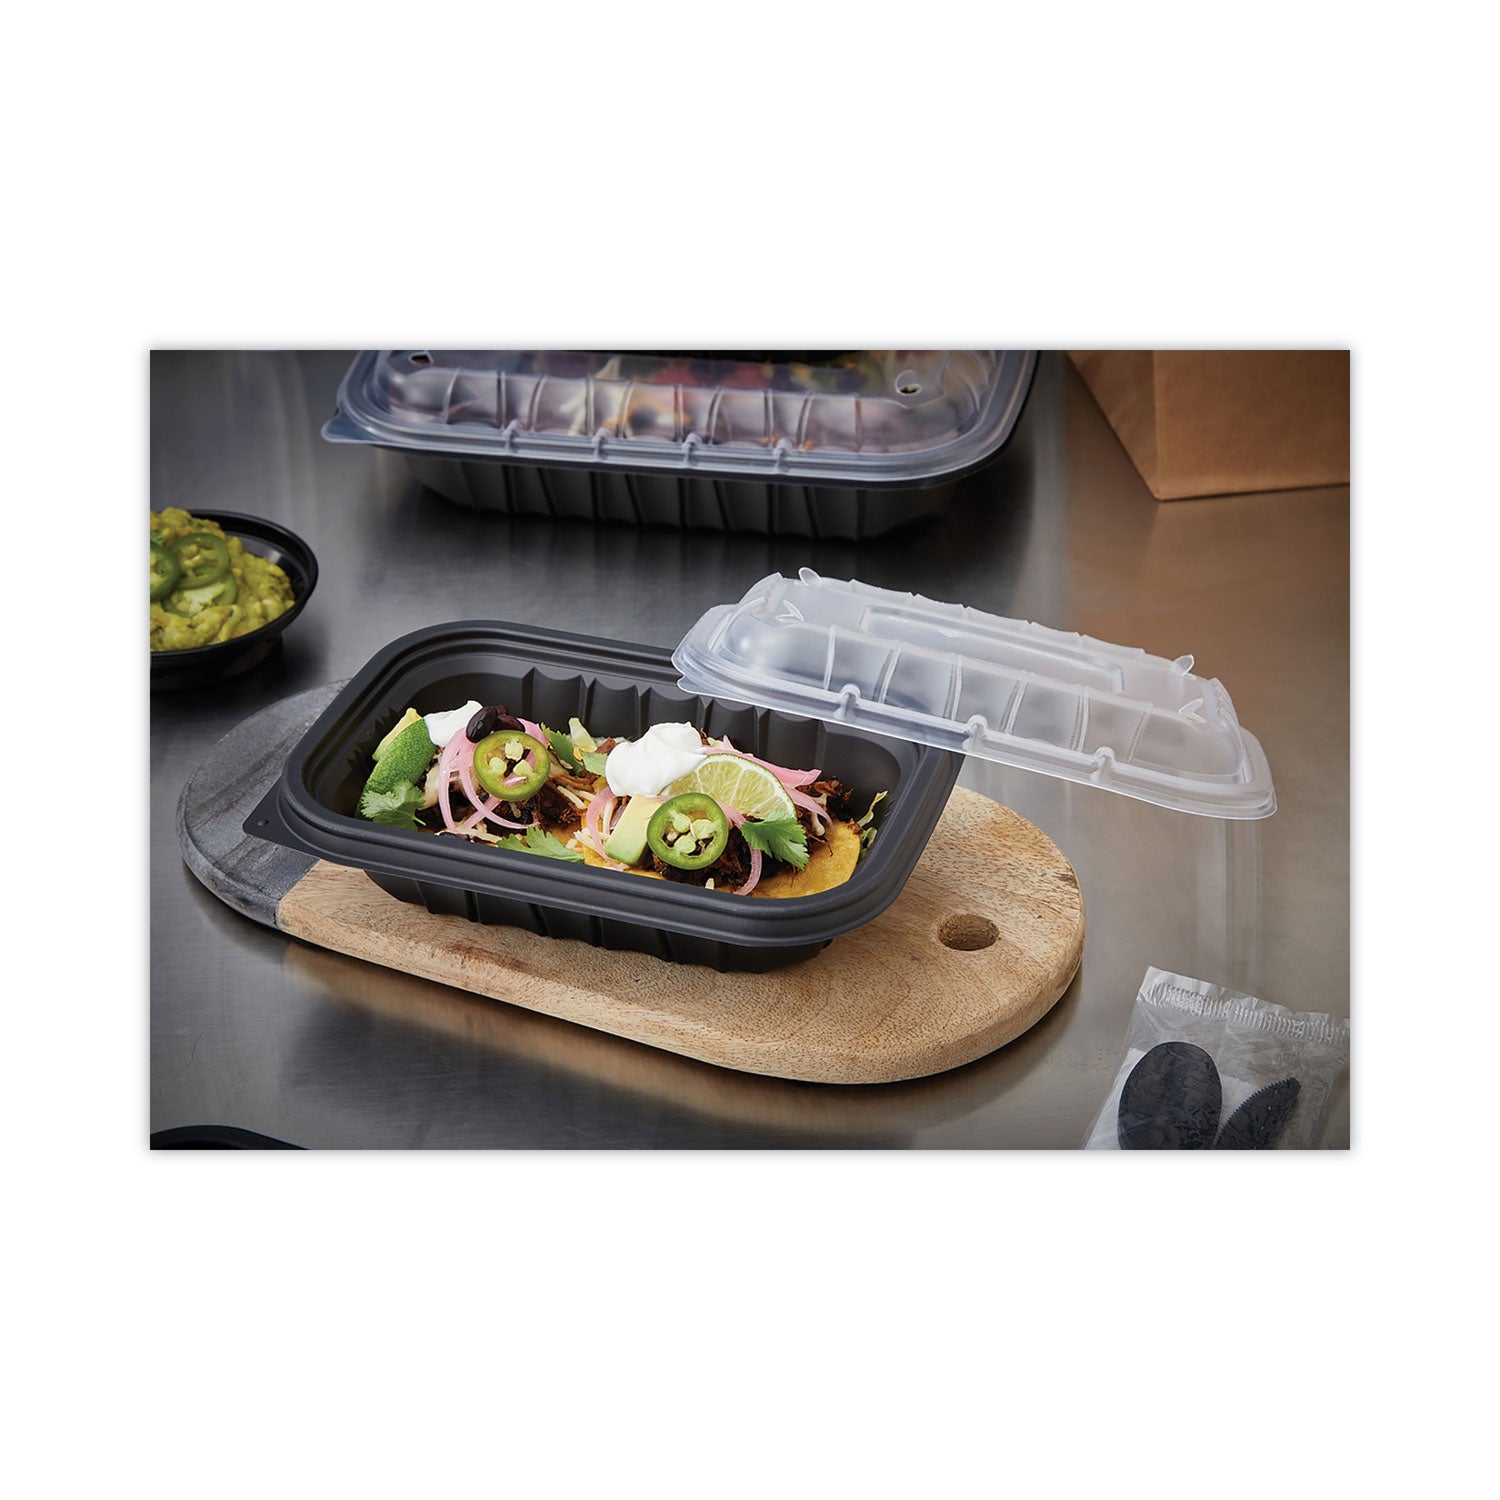 earthchoice-entree2go-takeout-container-24-oz-866-x-575-x-197-black-plastic-300-carton_pctycnb9x624000 - 4